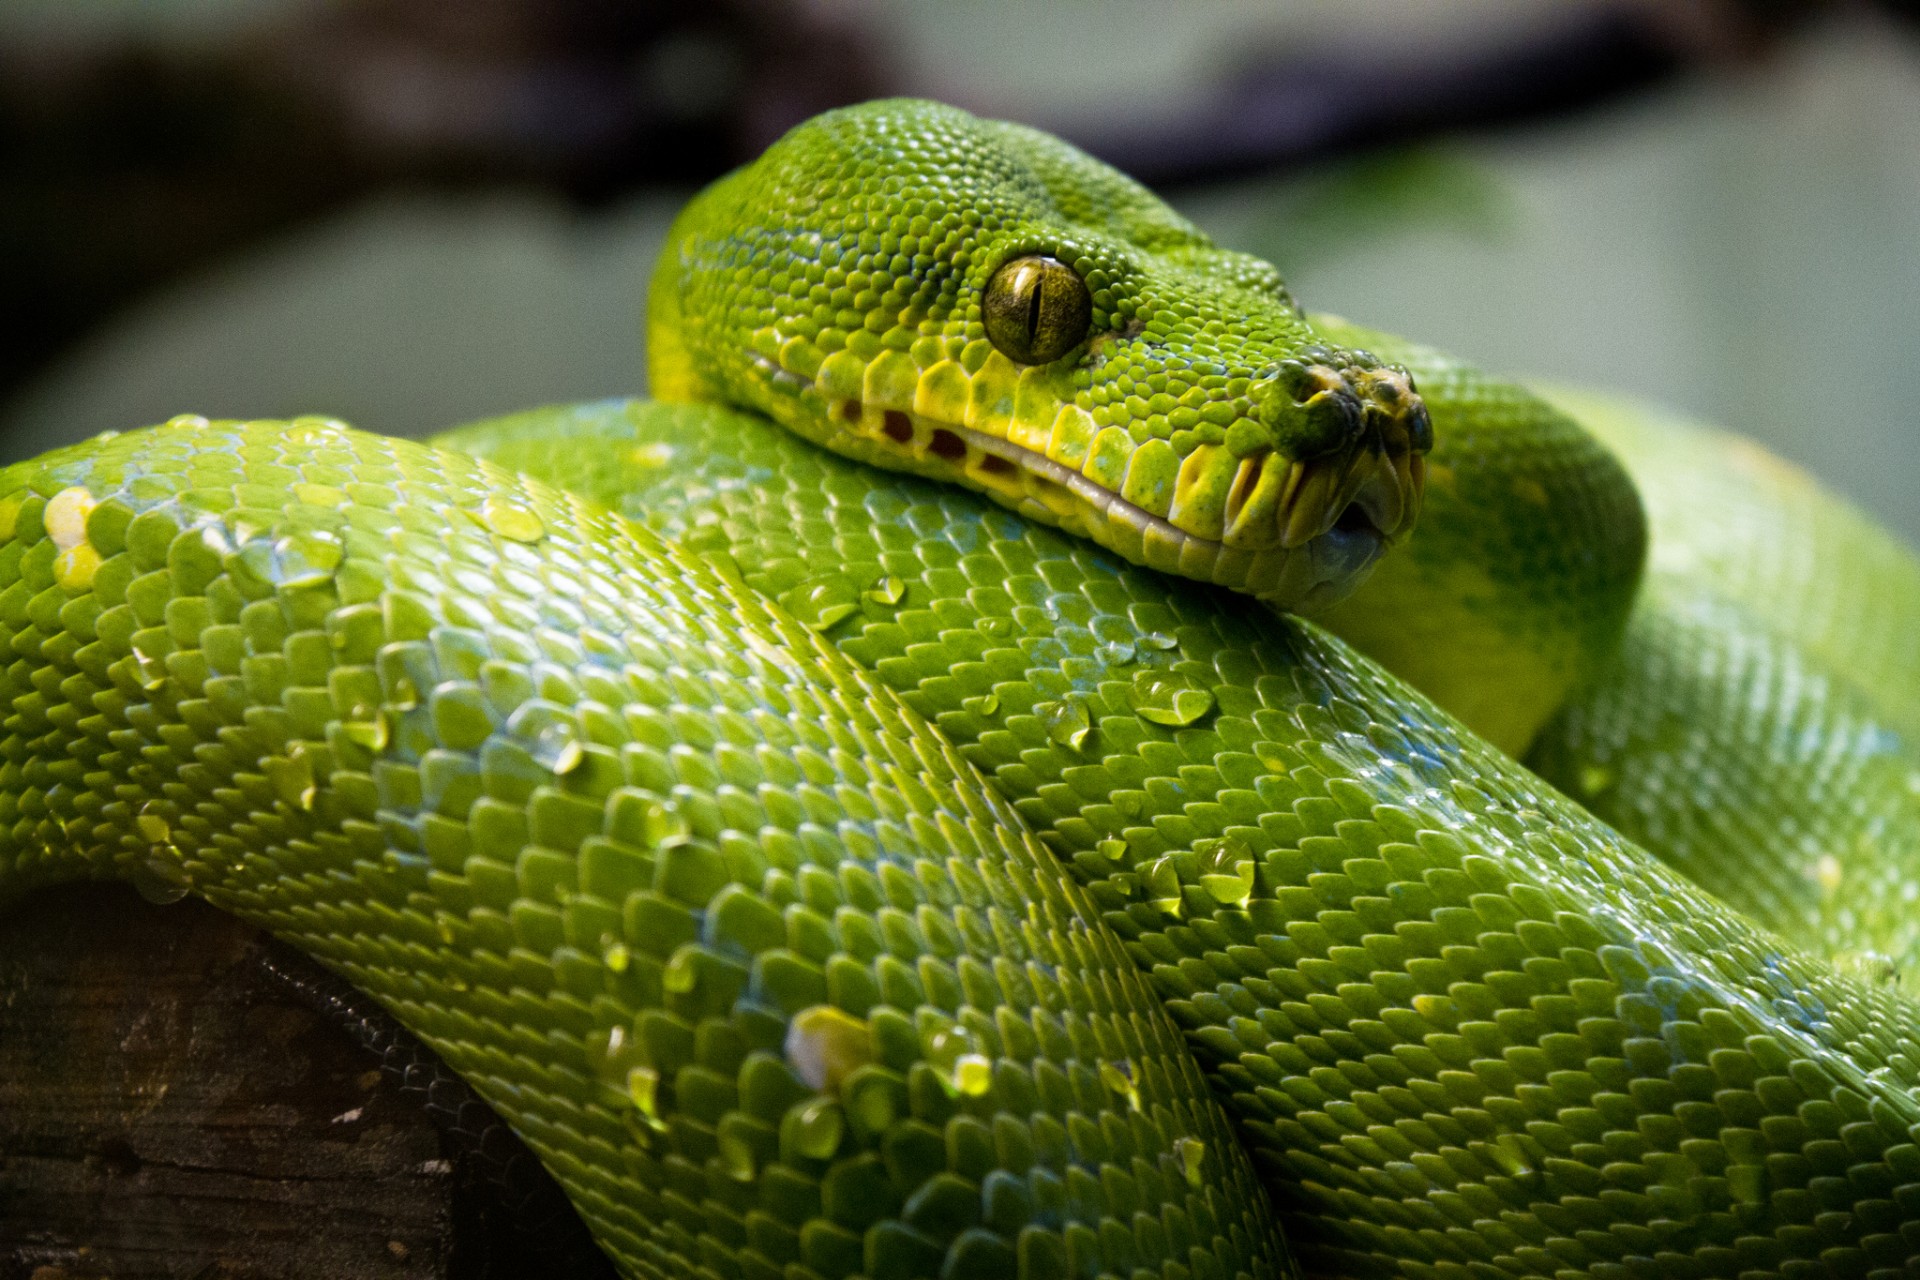 General 1920x1280 snake animals reptiles